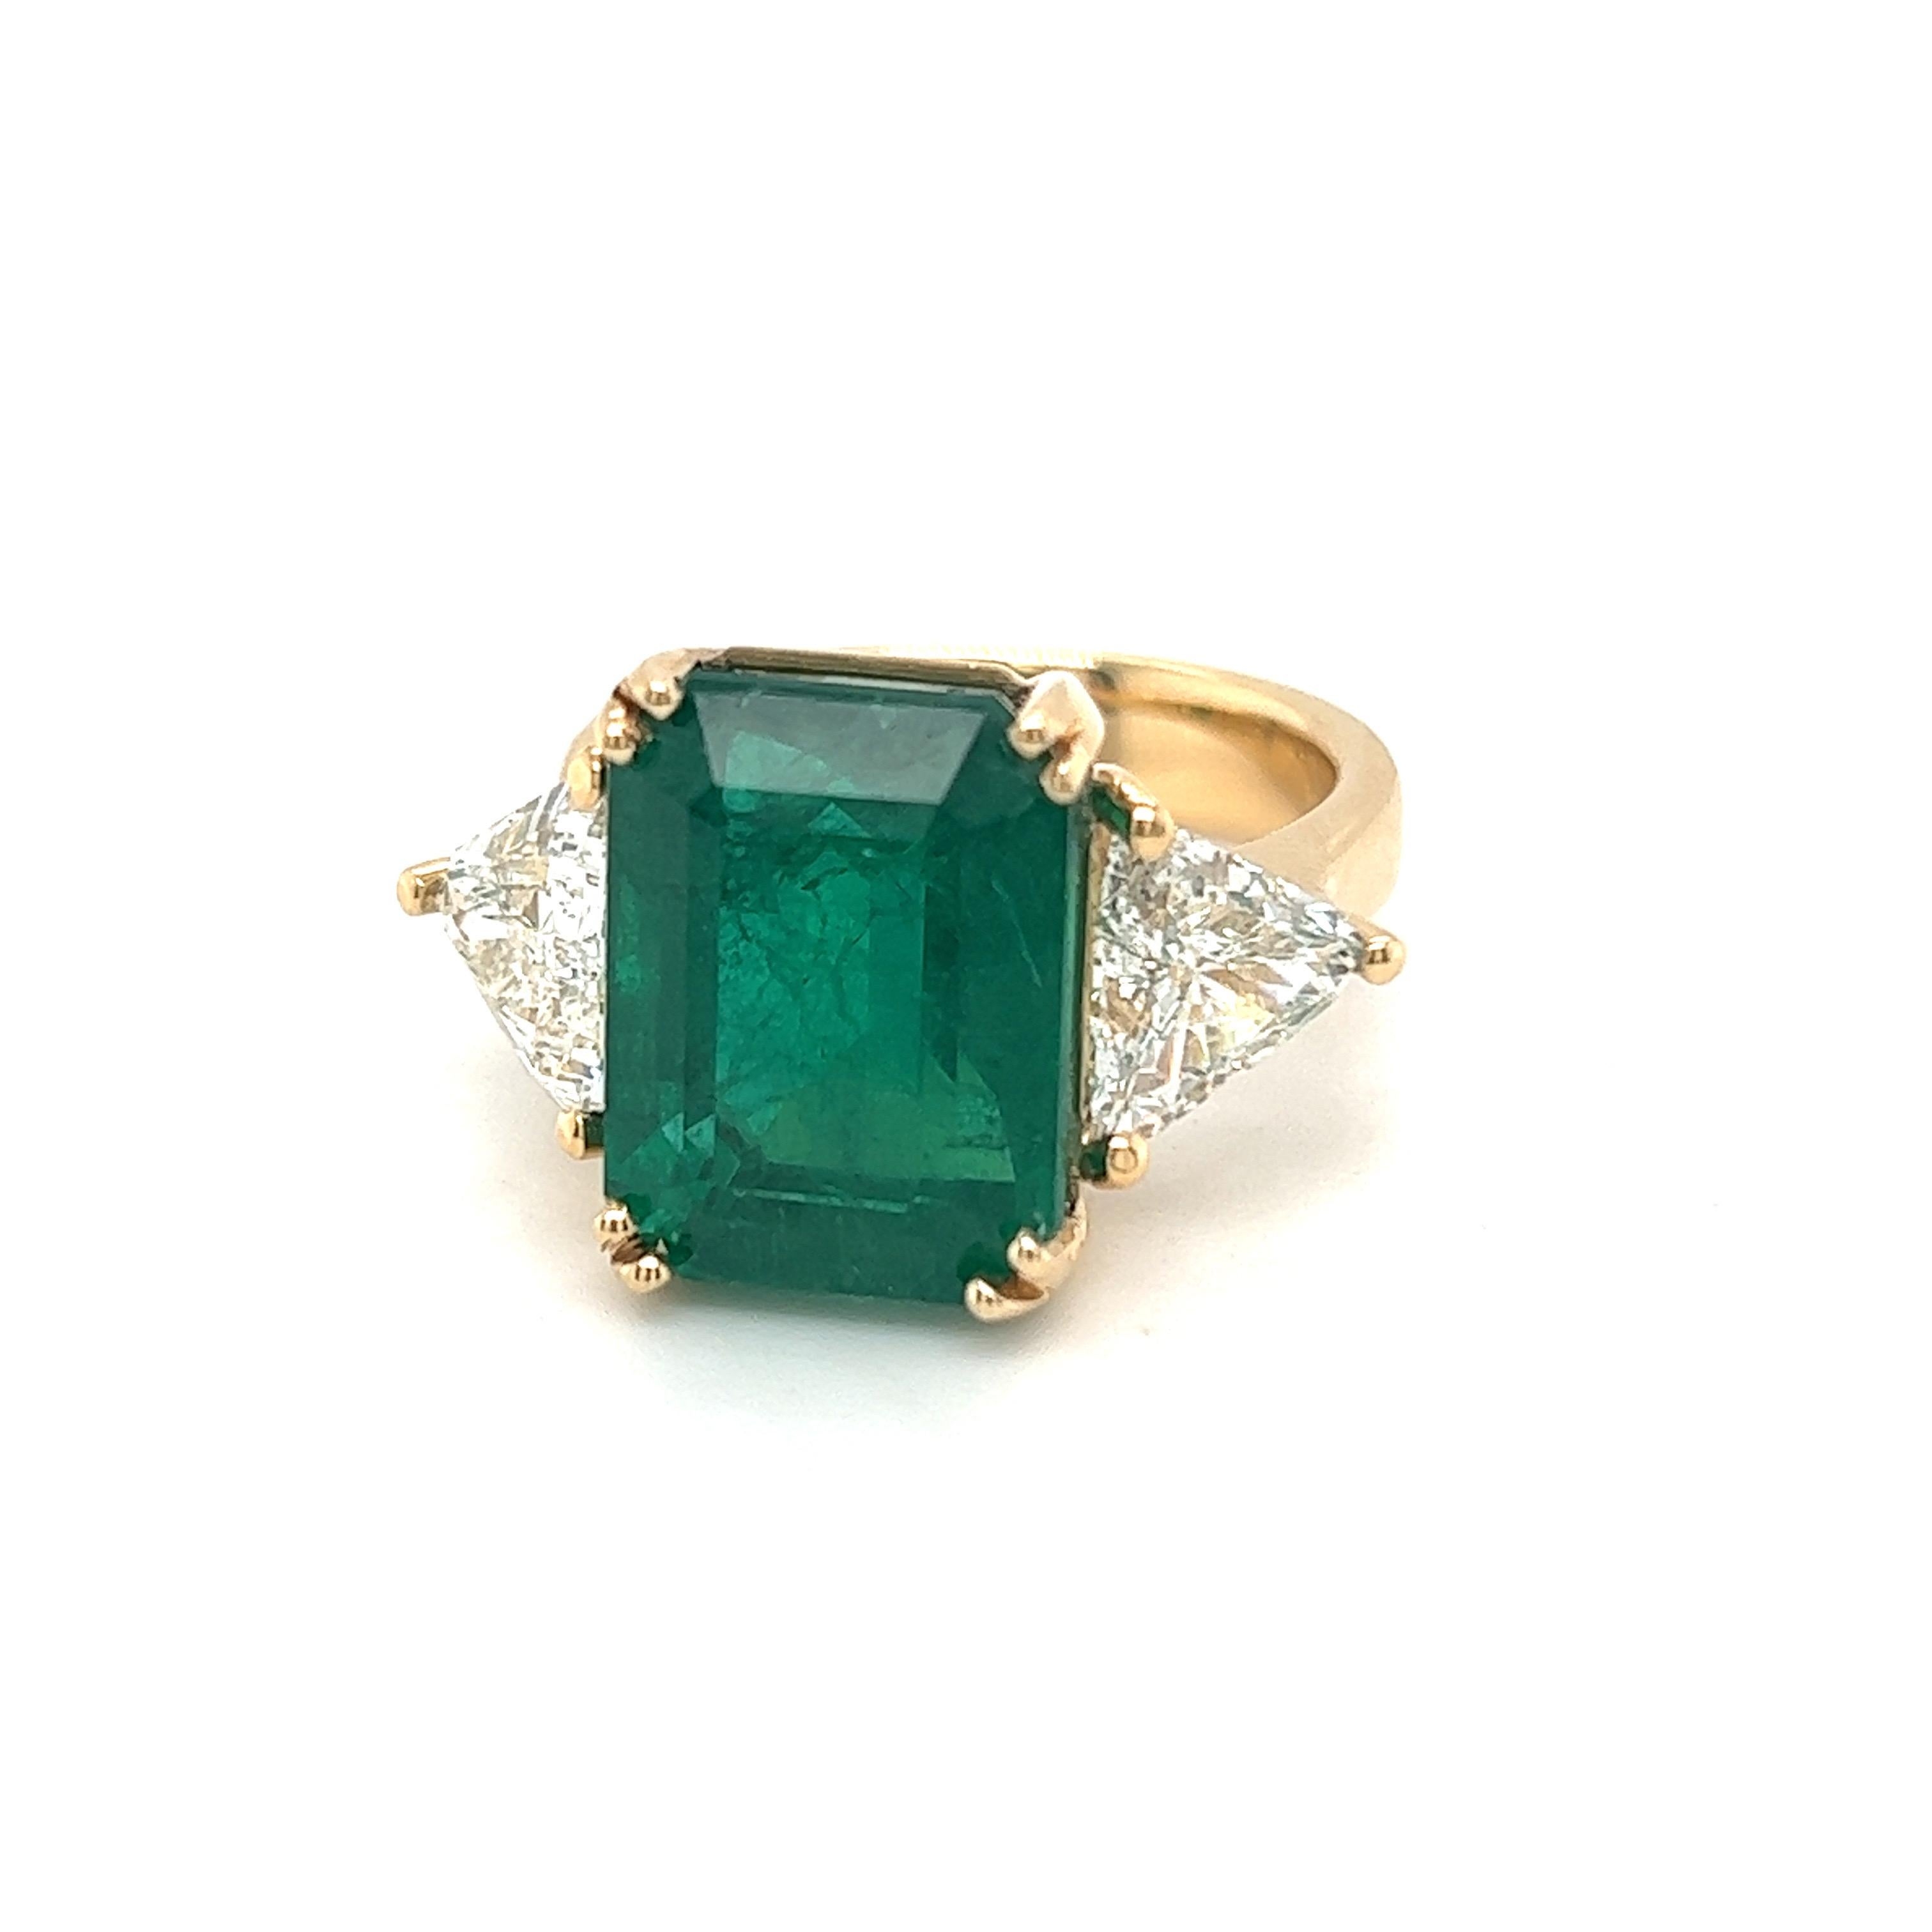 Women's or Men's 9.72 Carat GIA Certified Emerald Ring with 1.86 Carat SI1 Natural Diamonds For Sale